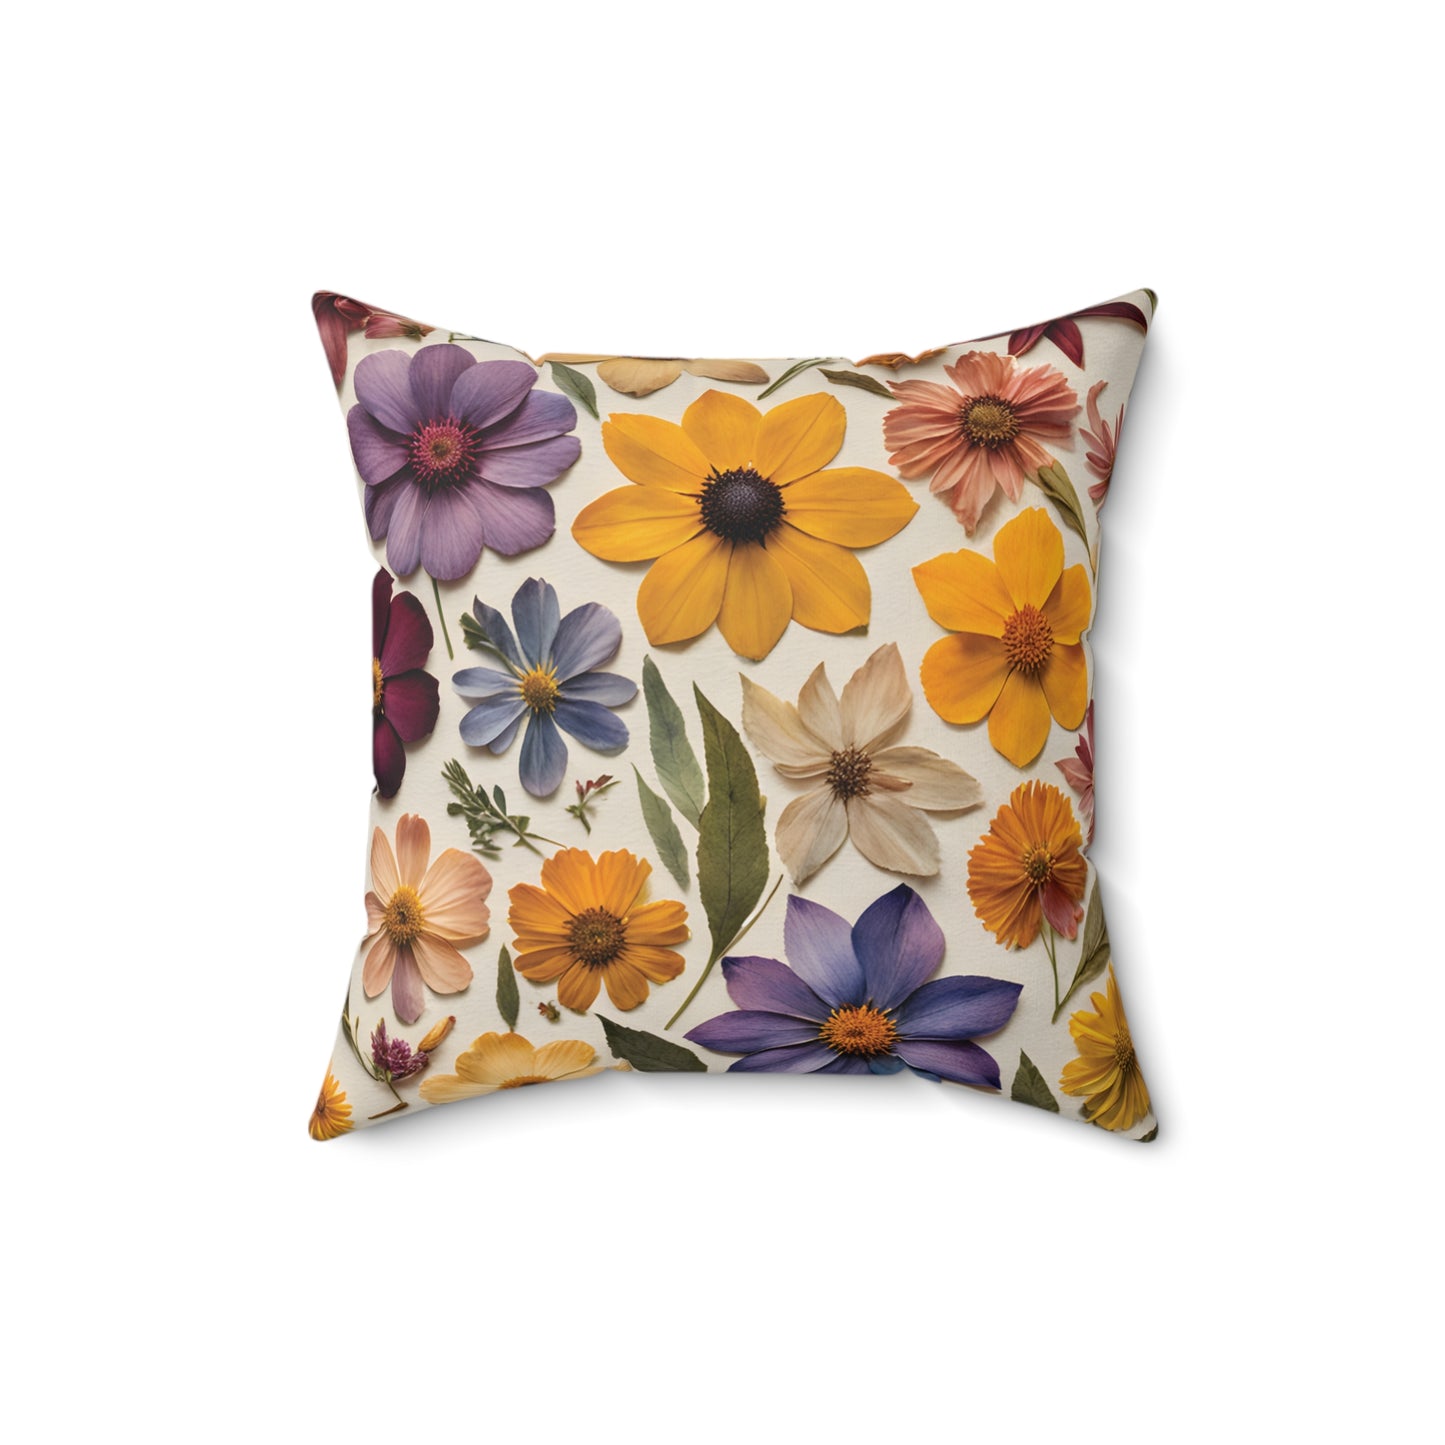 Pressed Flowers Square Pillow